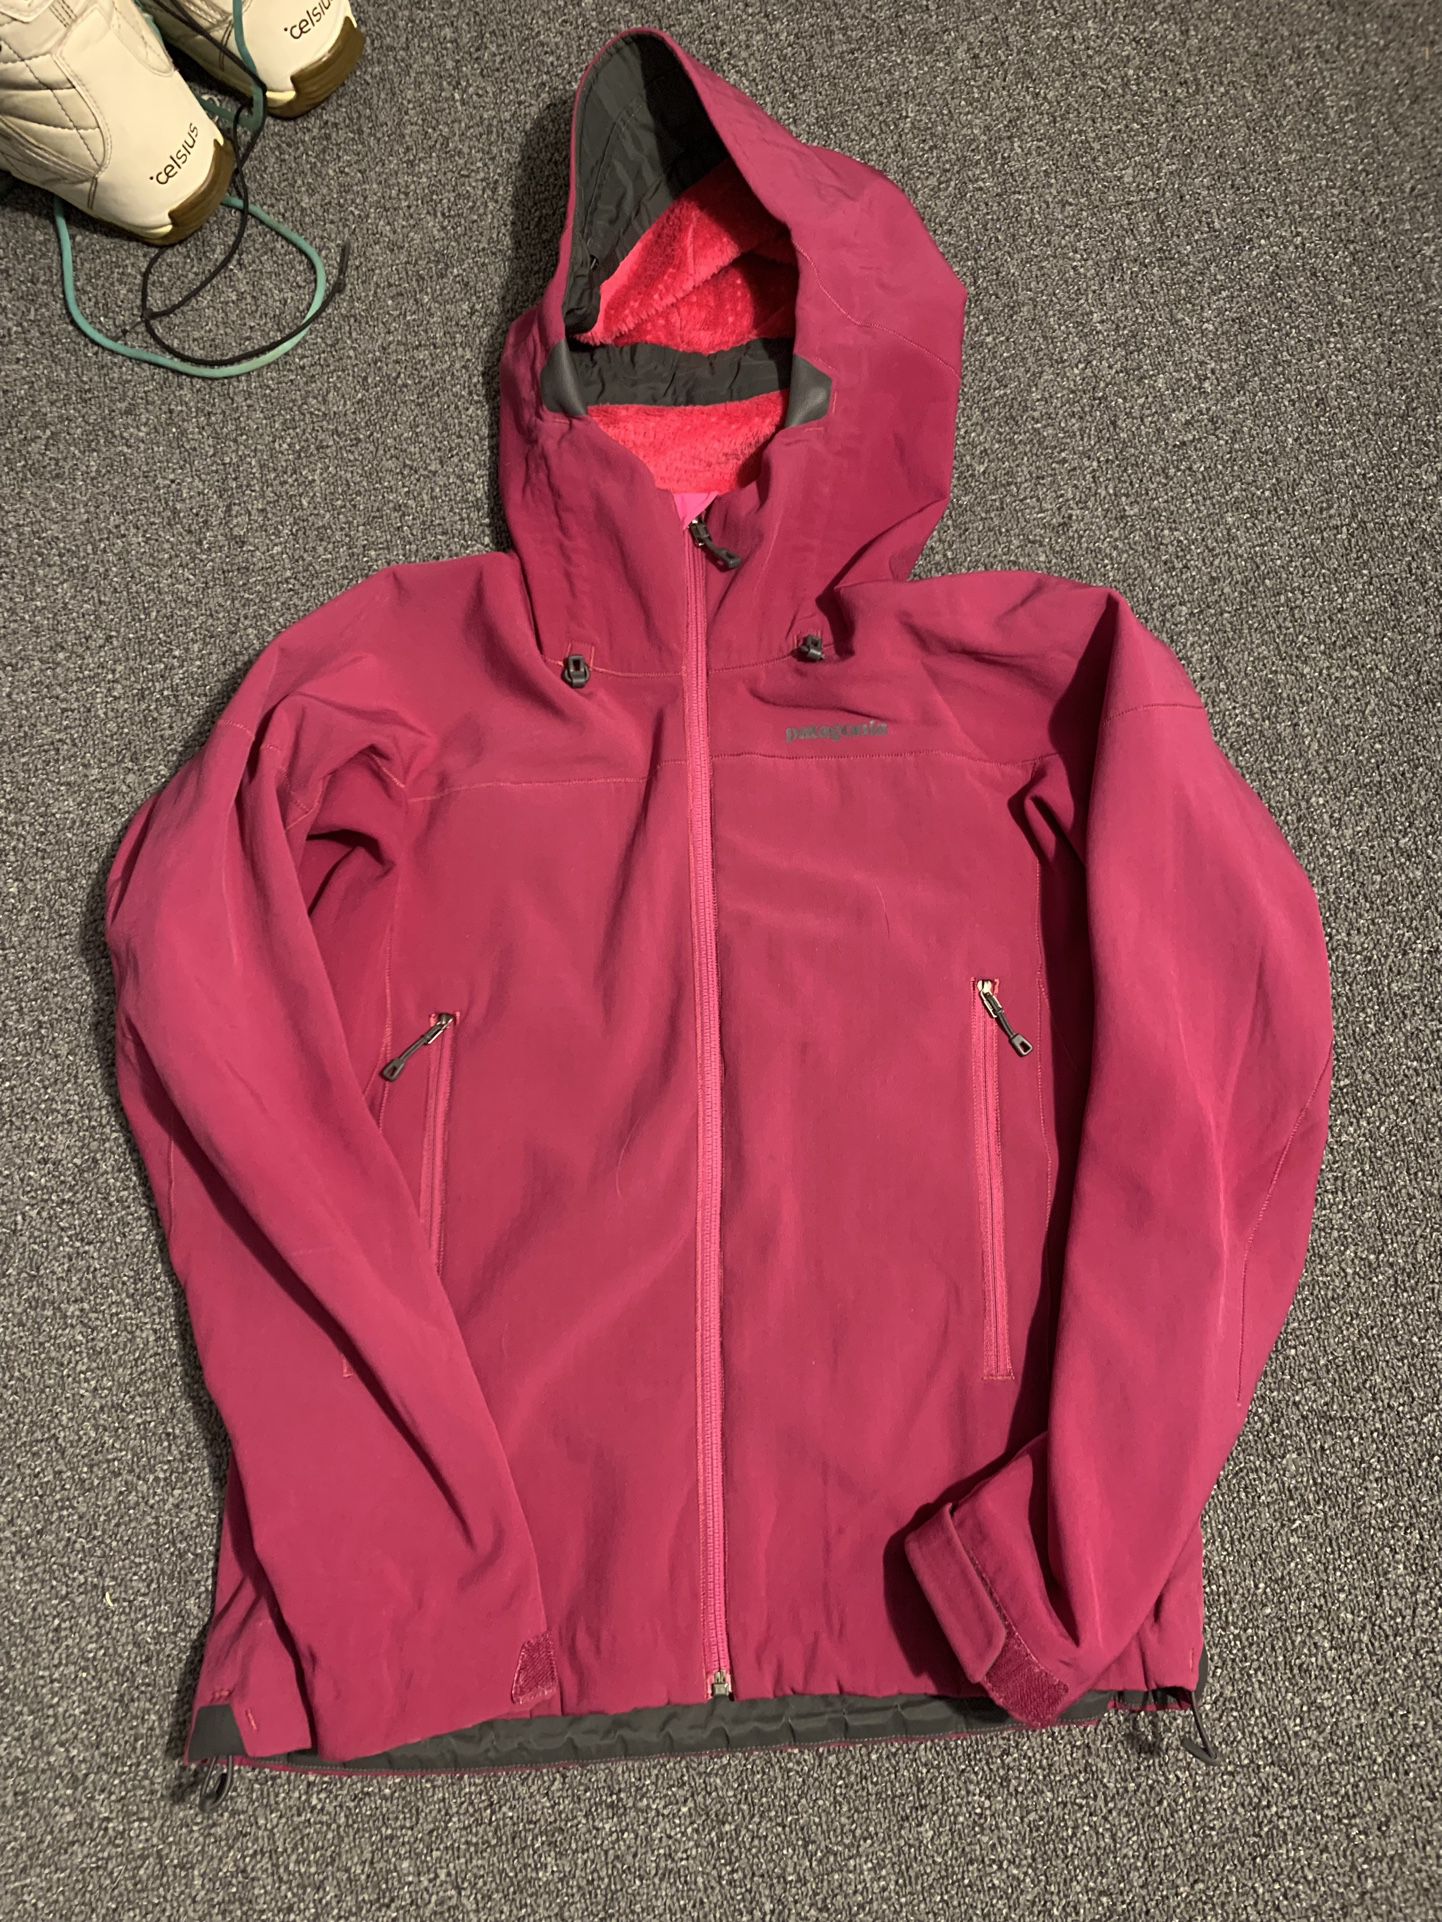 Patagonia  Woman’s jacket size small